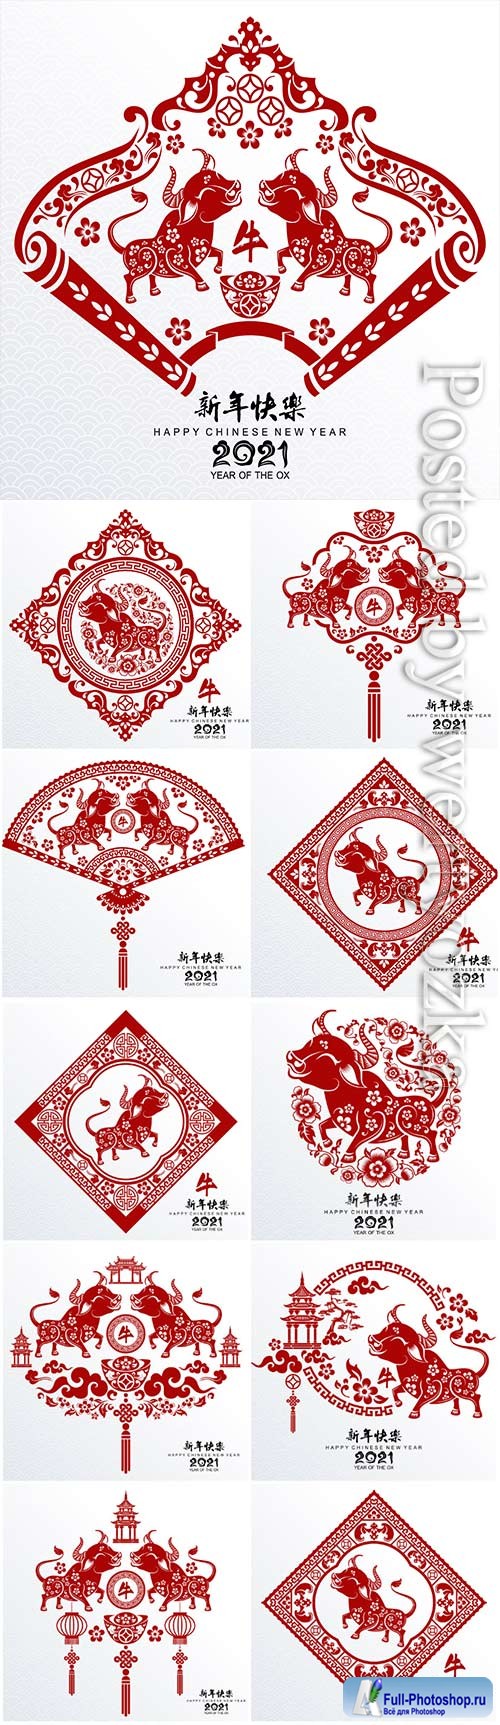 Chinese new year 2021, asian vector background